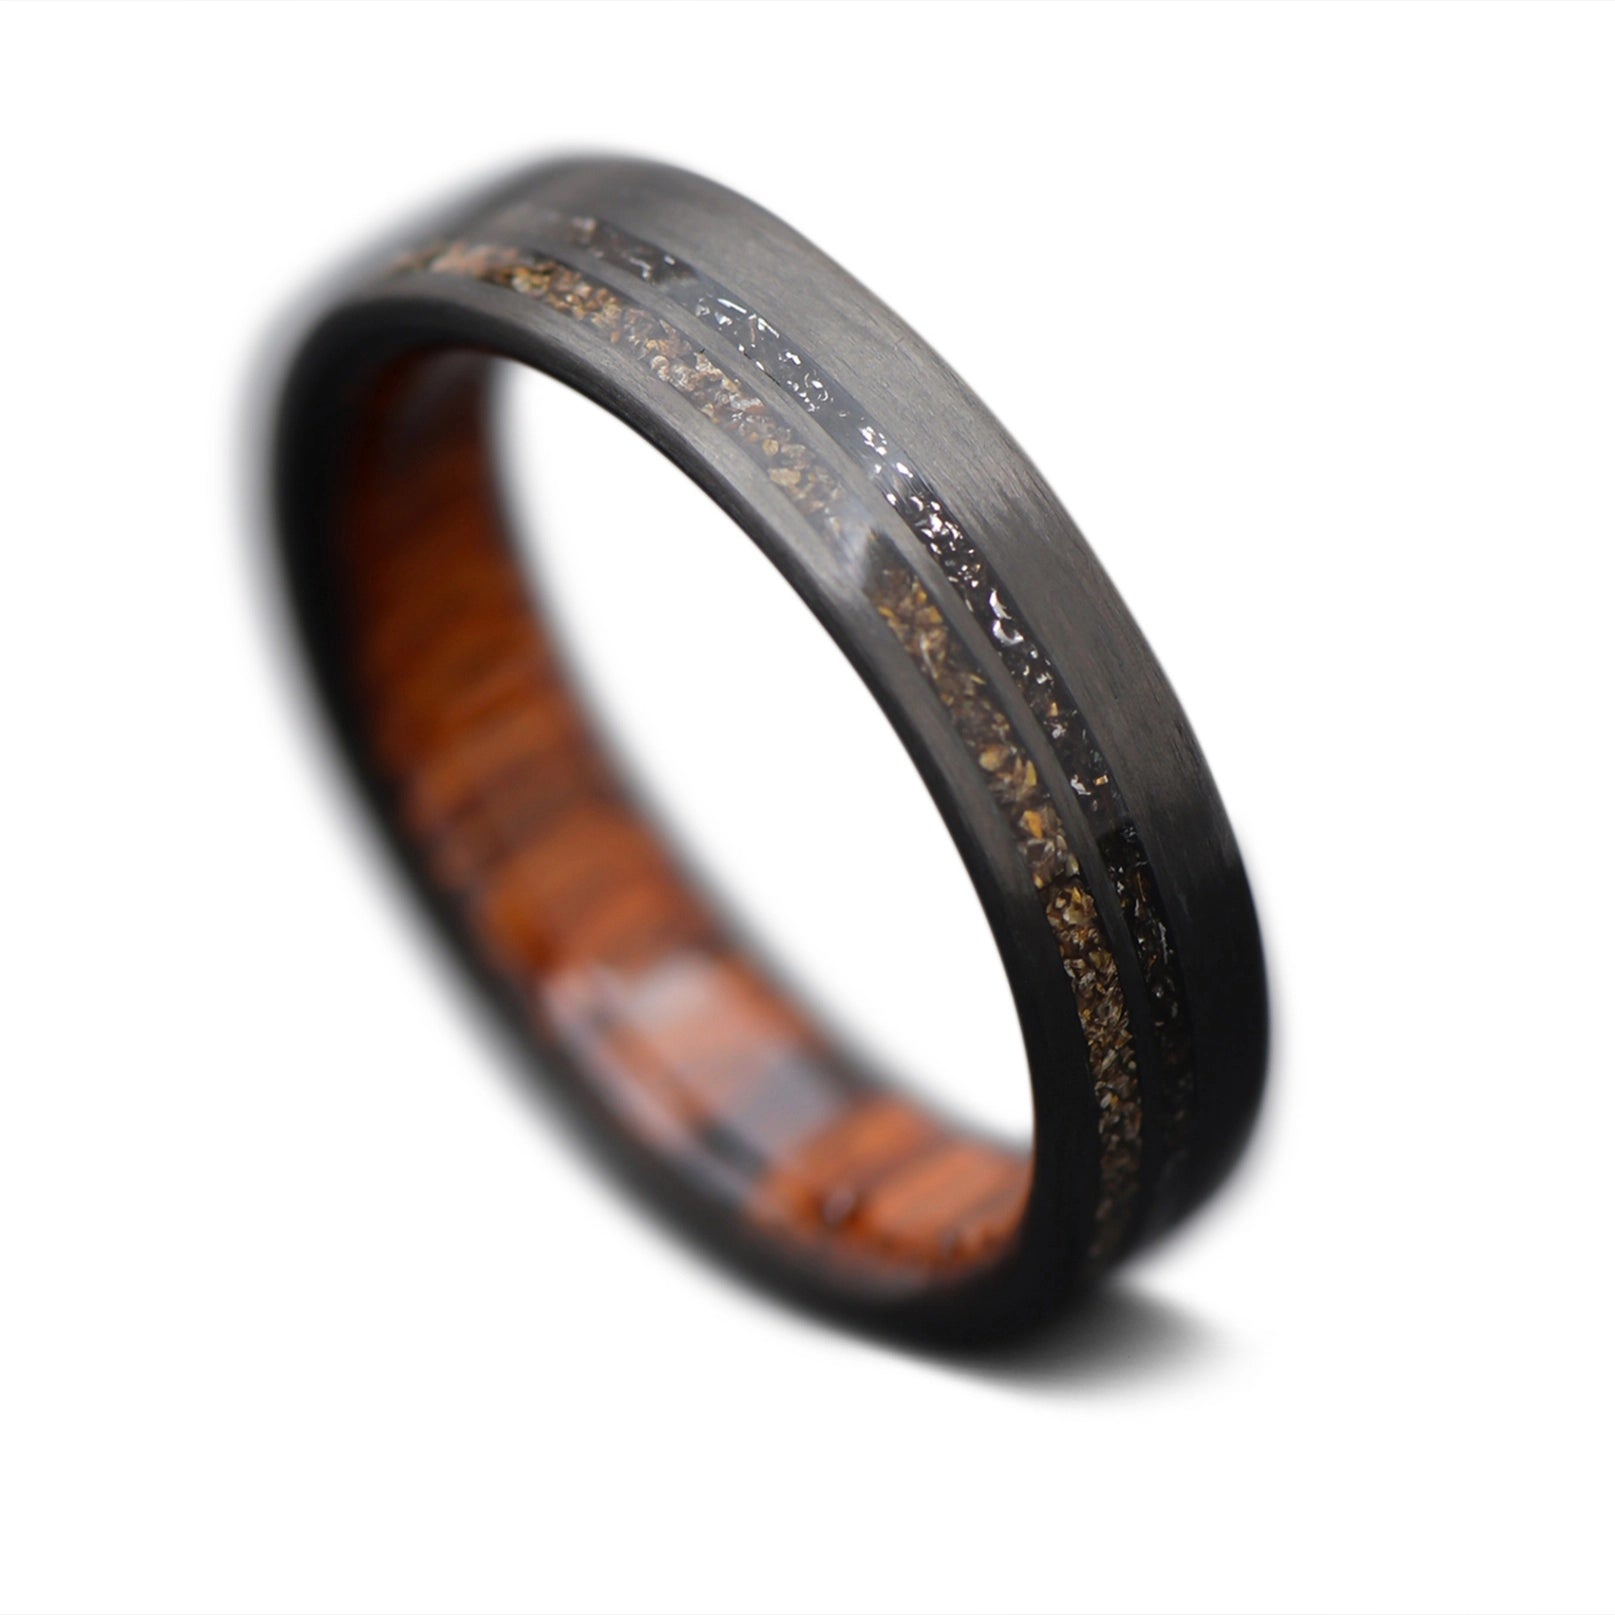 CarbonUni Core Ring with Crushed T-Rex, Meteorite inlay and Teak wood inner sleeve, 6mm -THE INNOVATOR